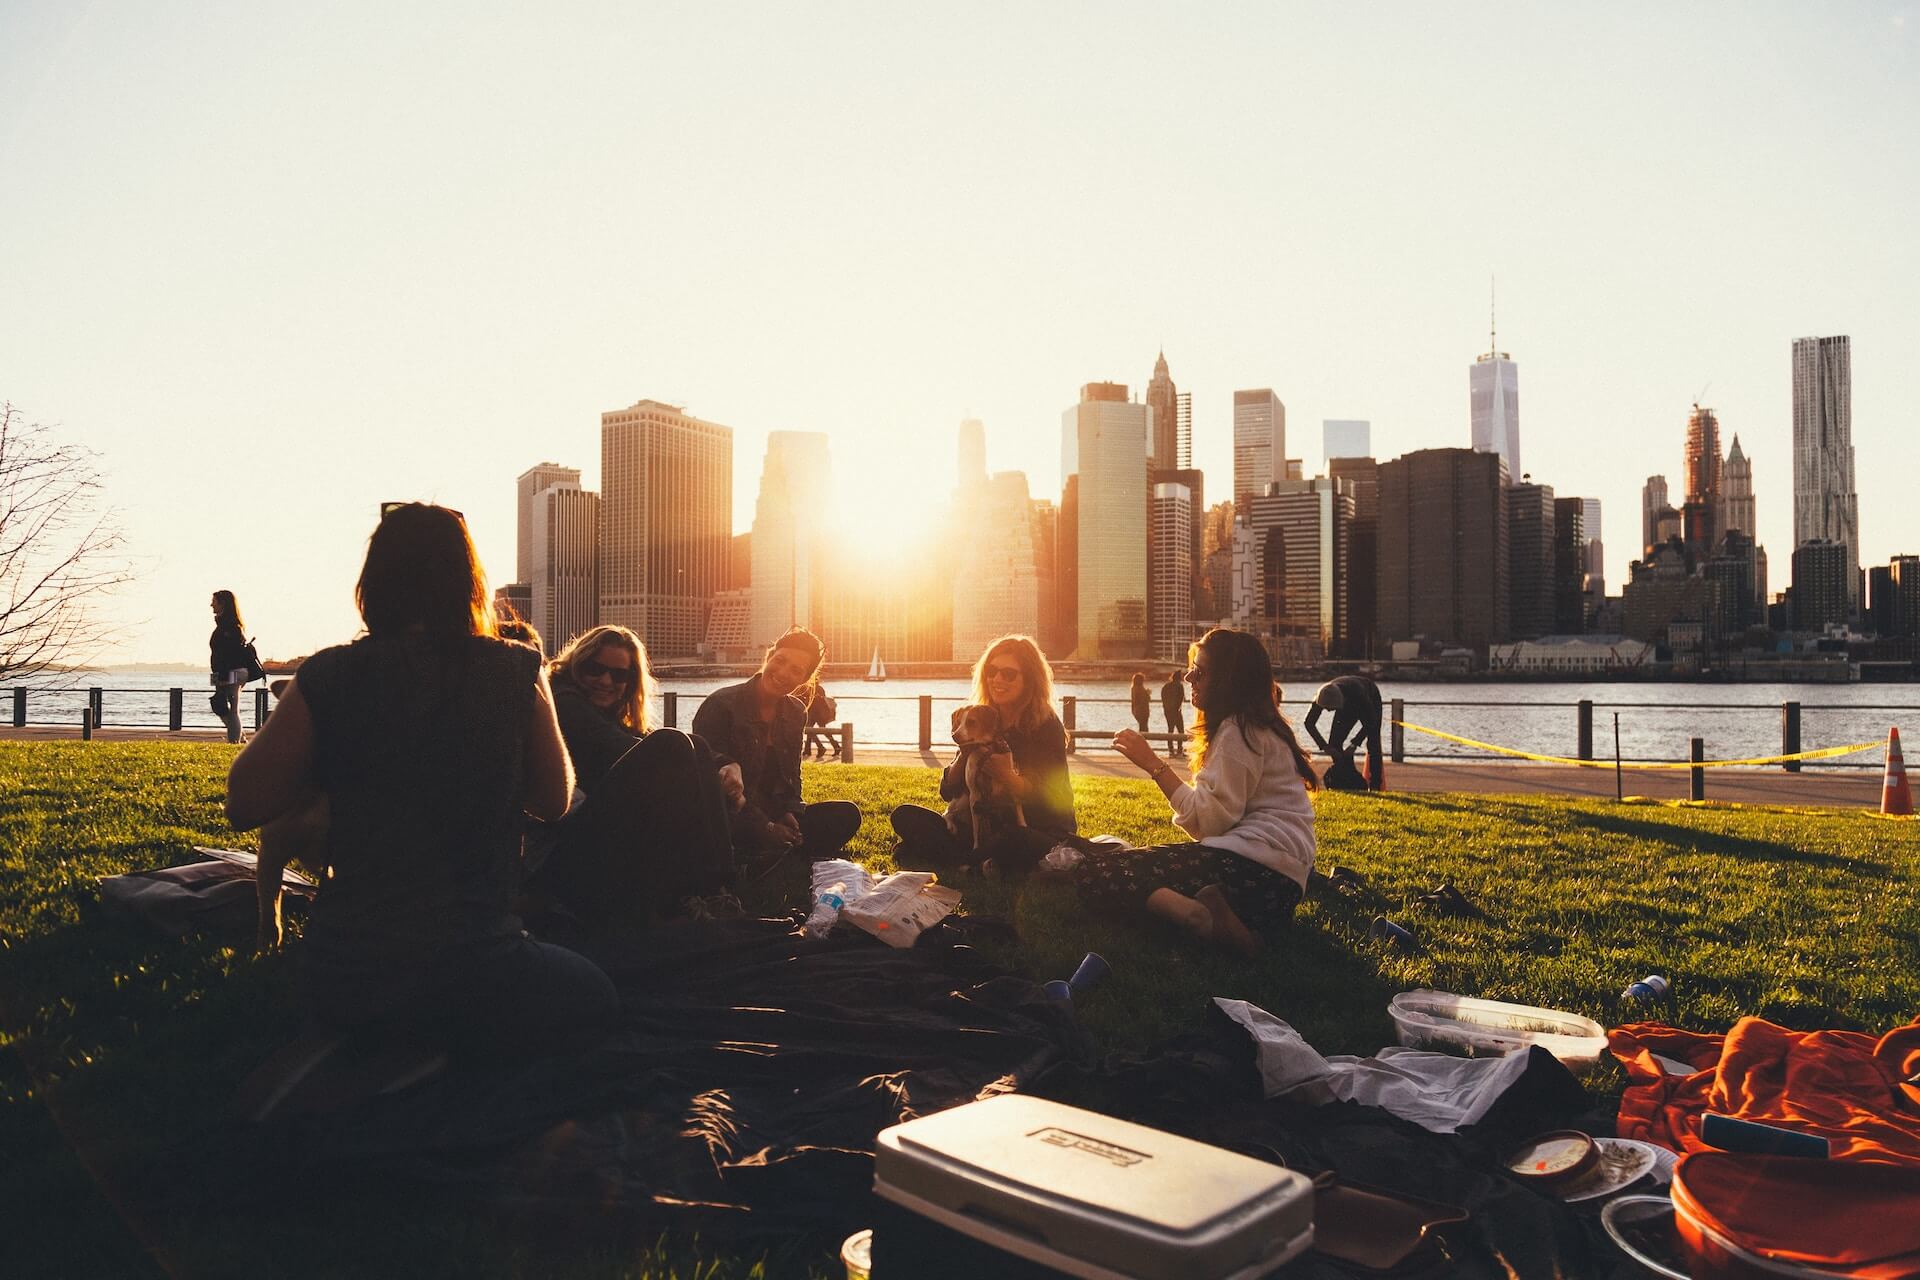 group-of-friends-sitting -in-park-next-to-water-66002